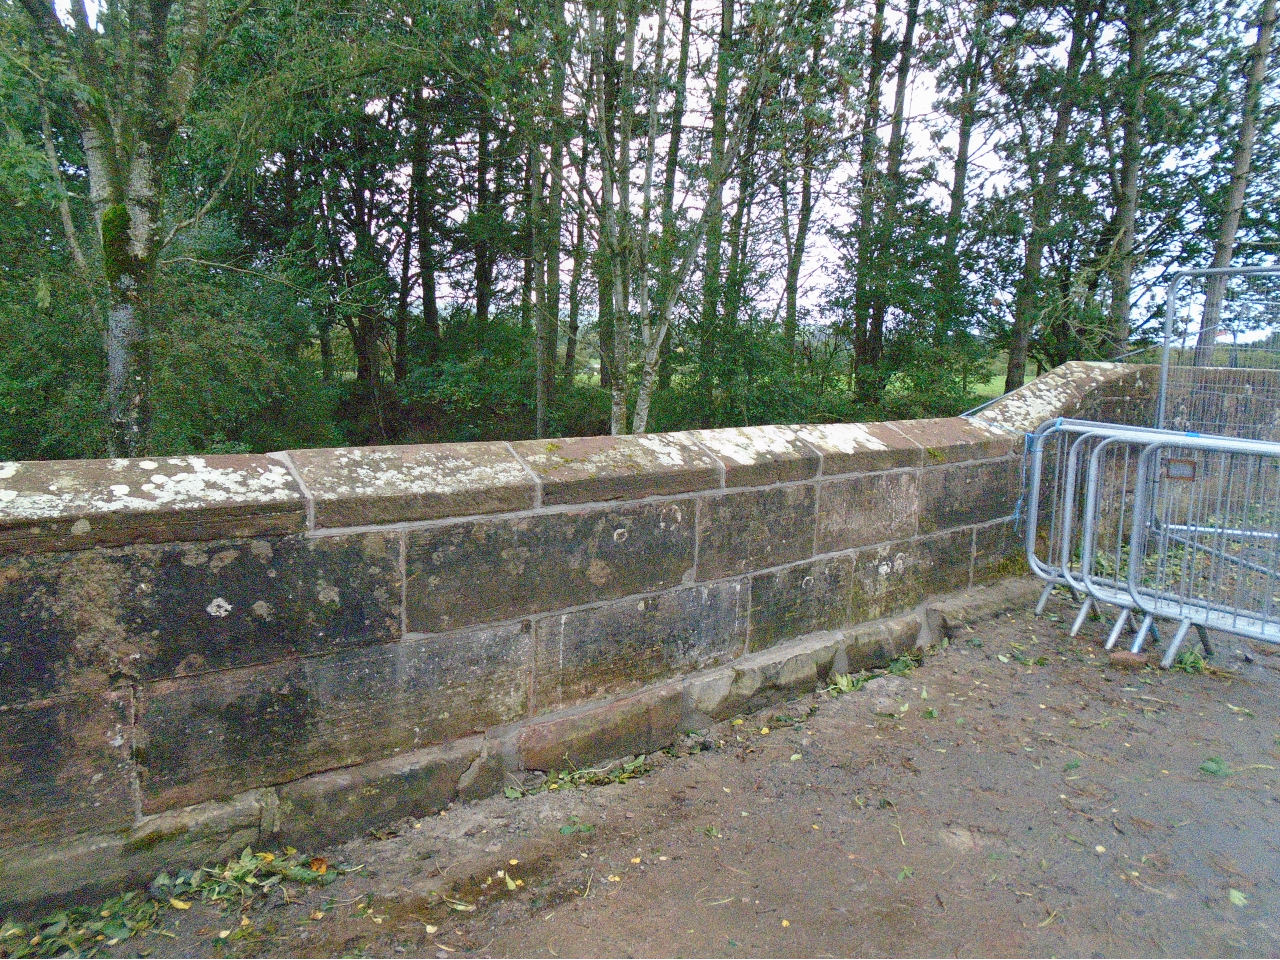 South parapet reinstated